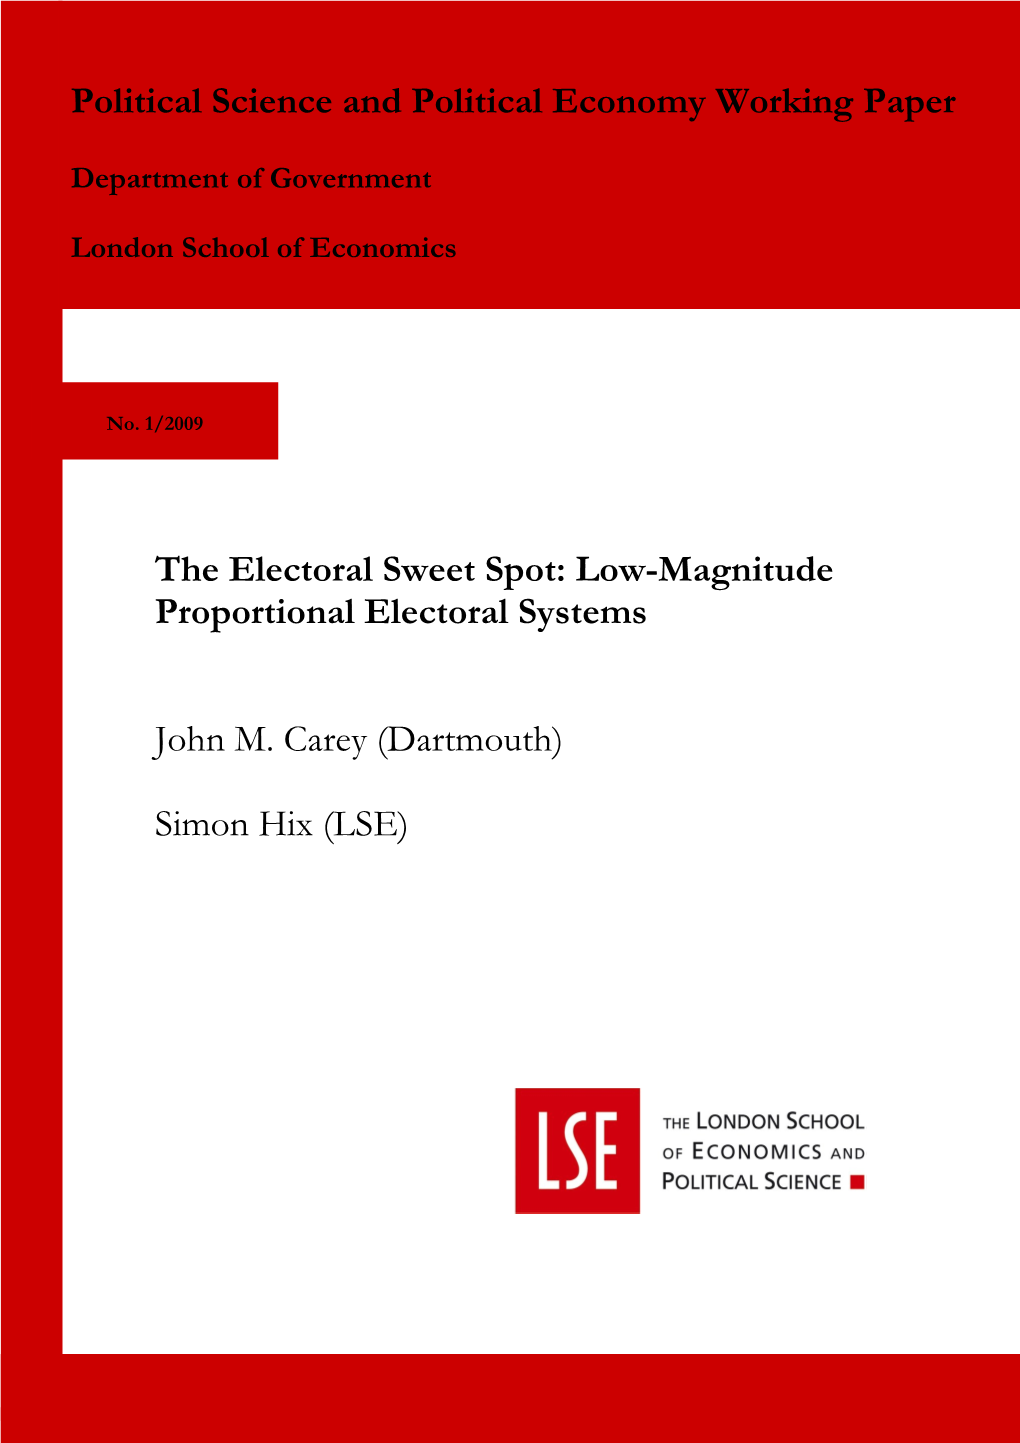 Low-Magnitude Proportional Electoral Systems John M. Carey